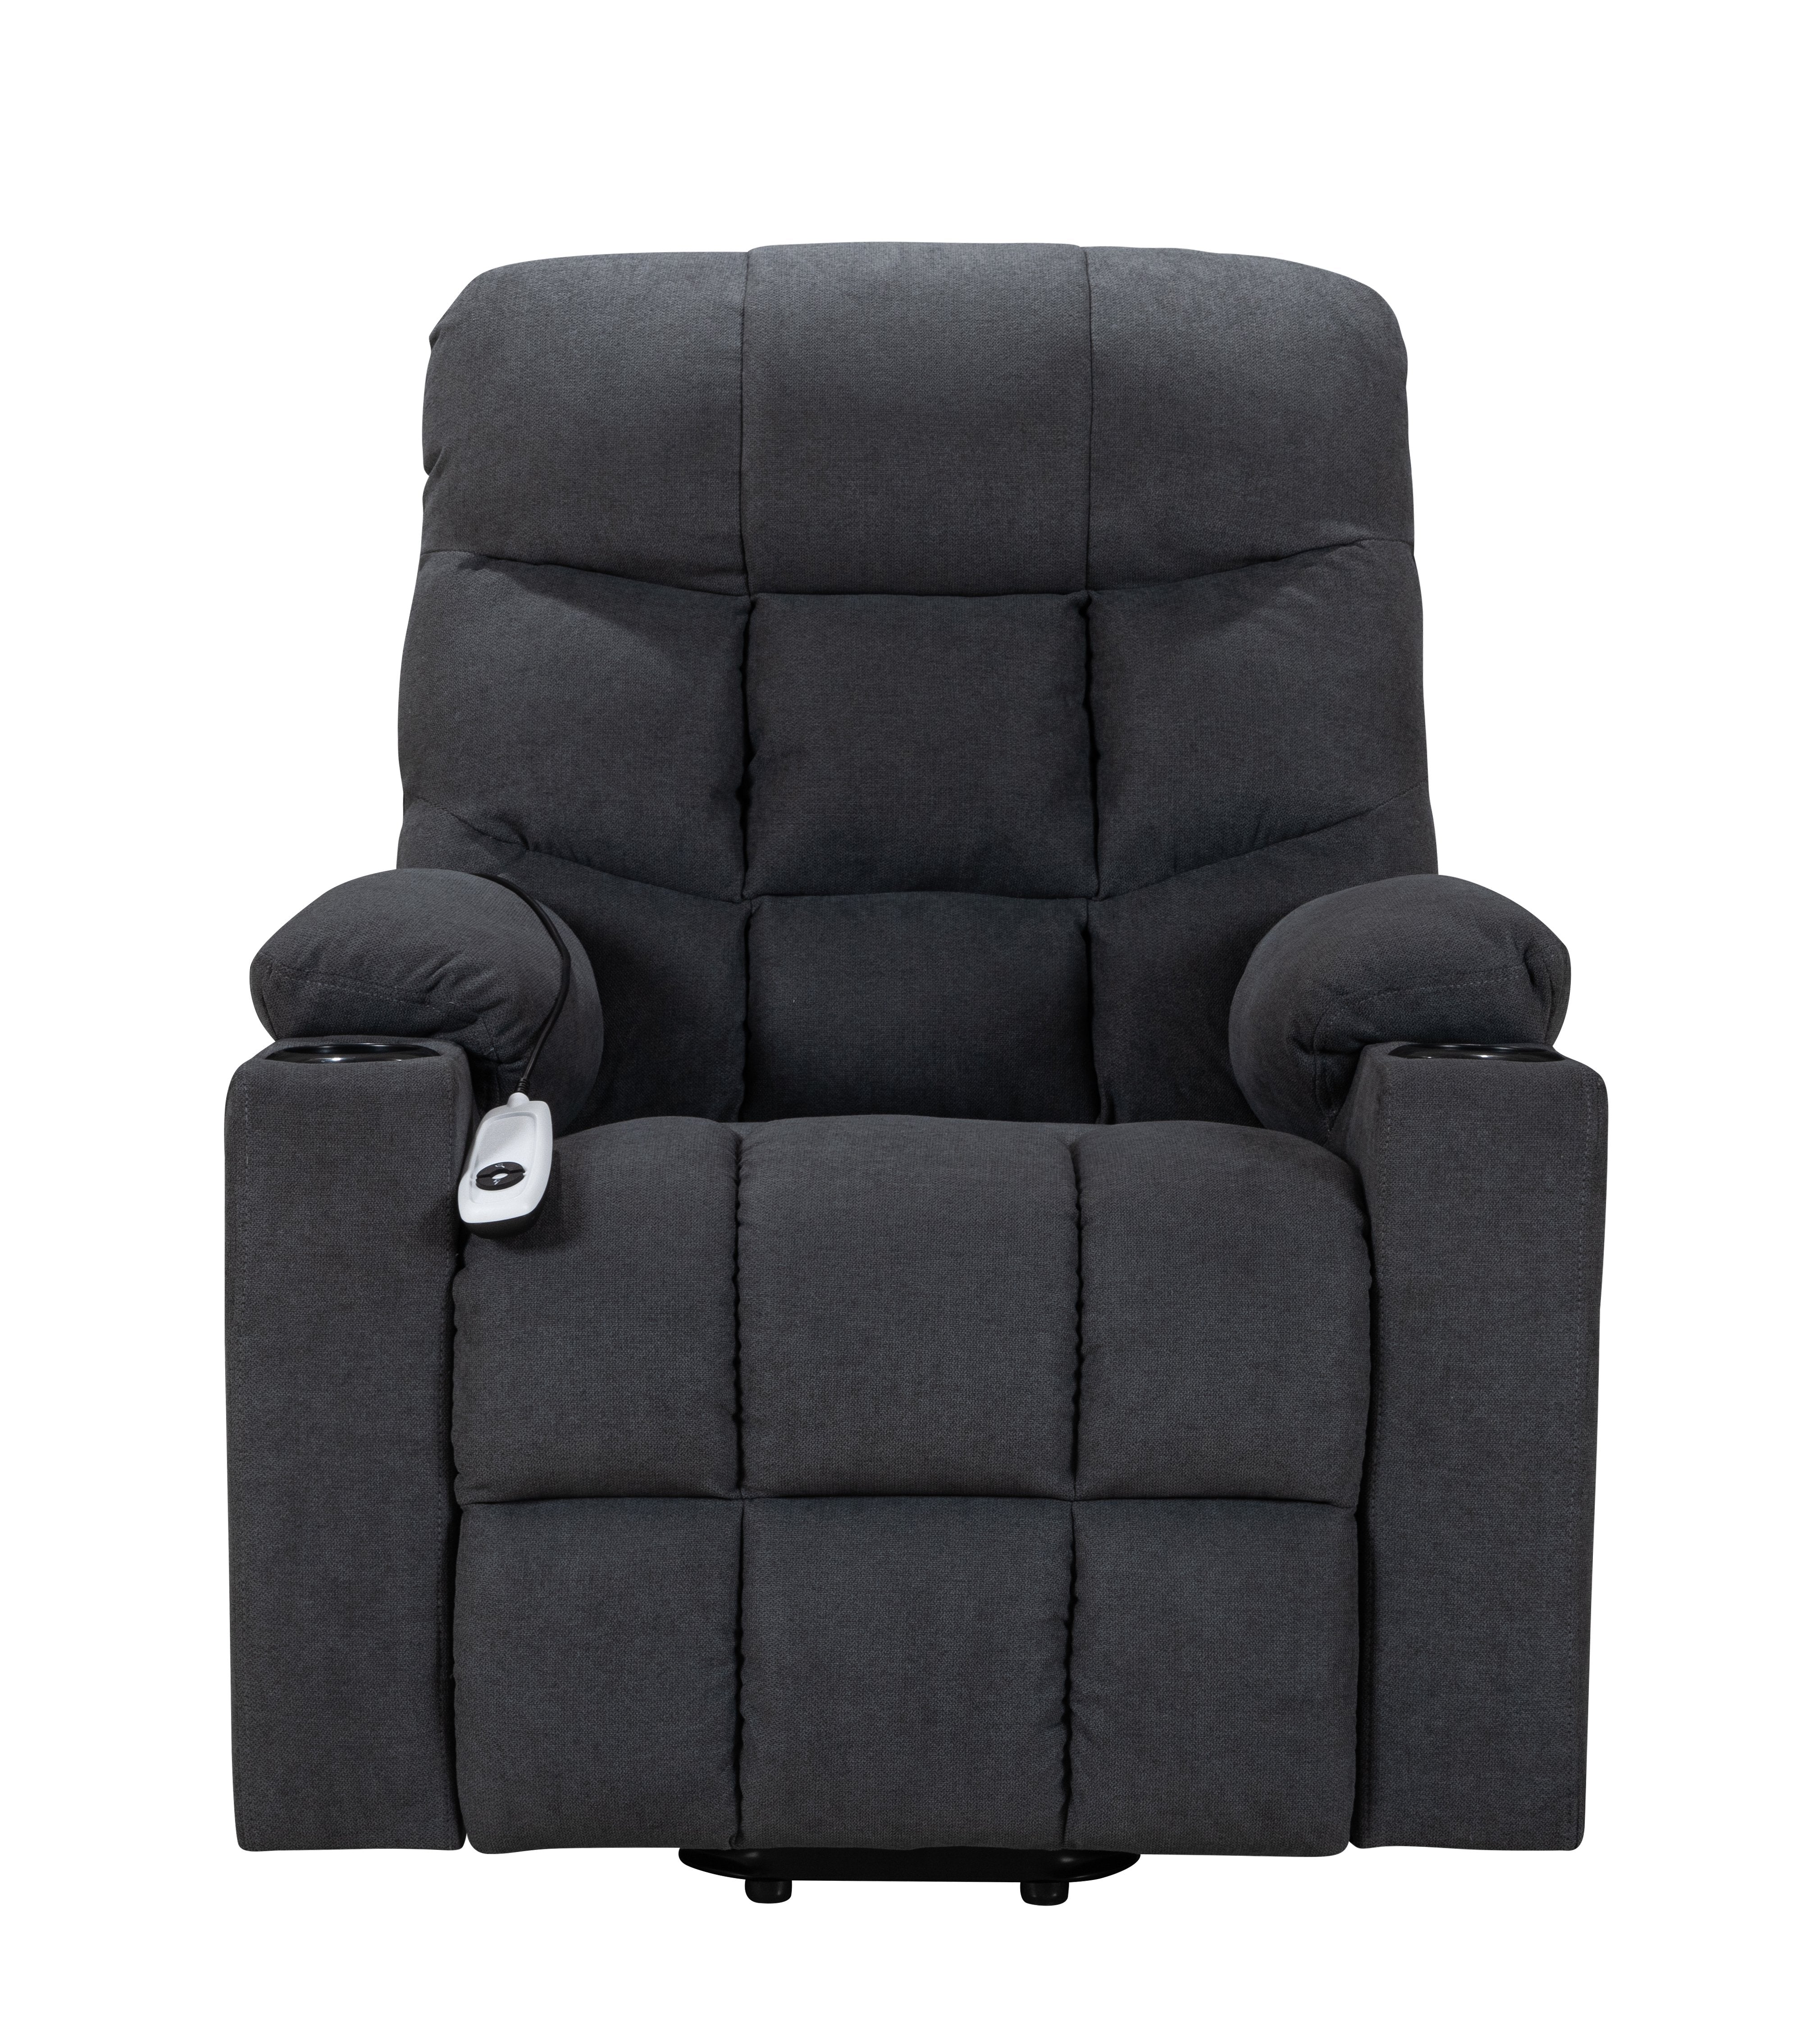 Power Lift Recliner for Elderly, Heated and Massage, with Cup Holders and Two Side Pocket, USB Ports-Boyel Living